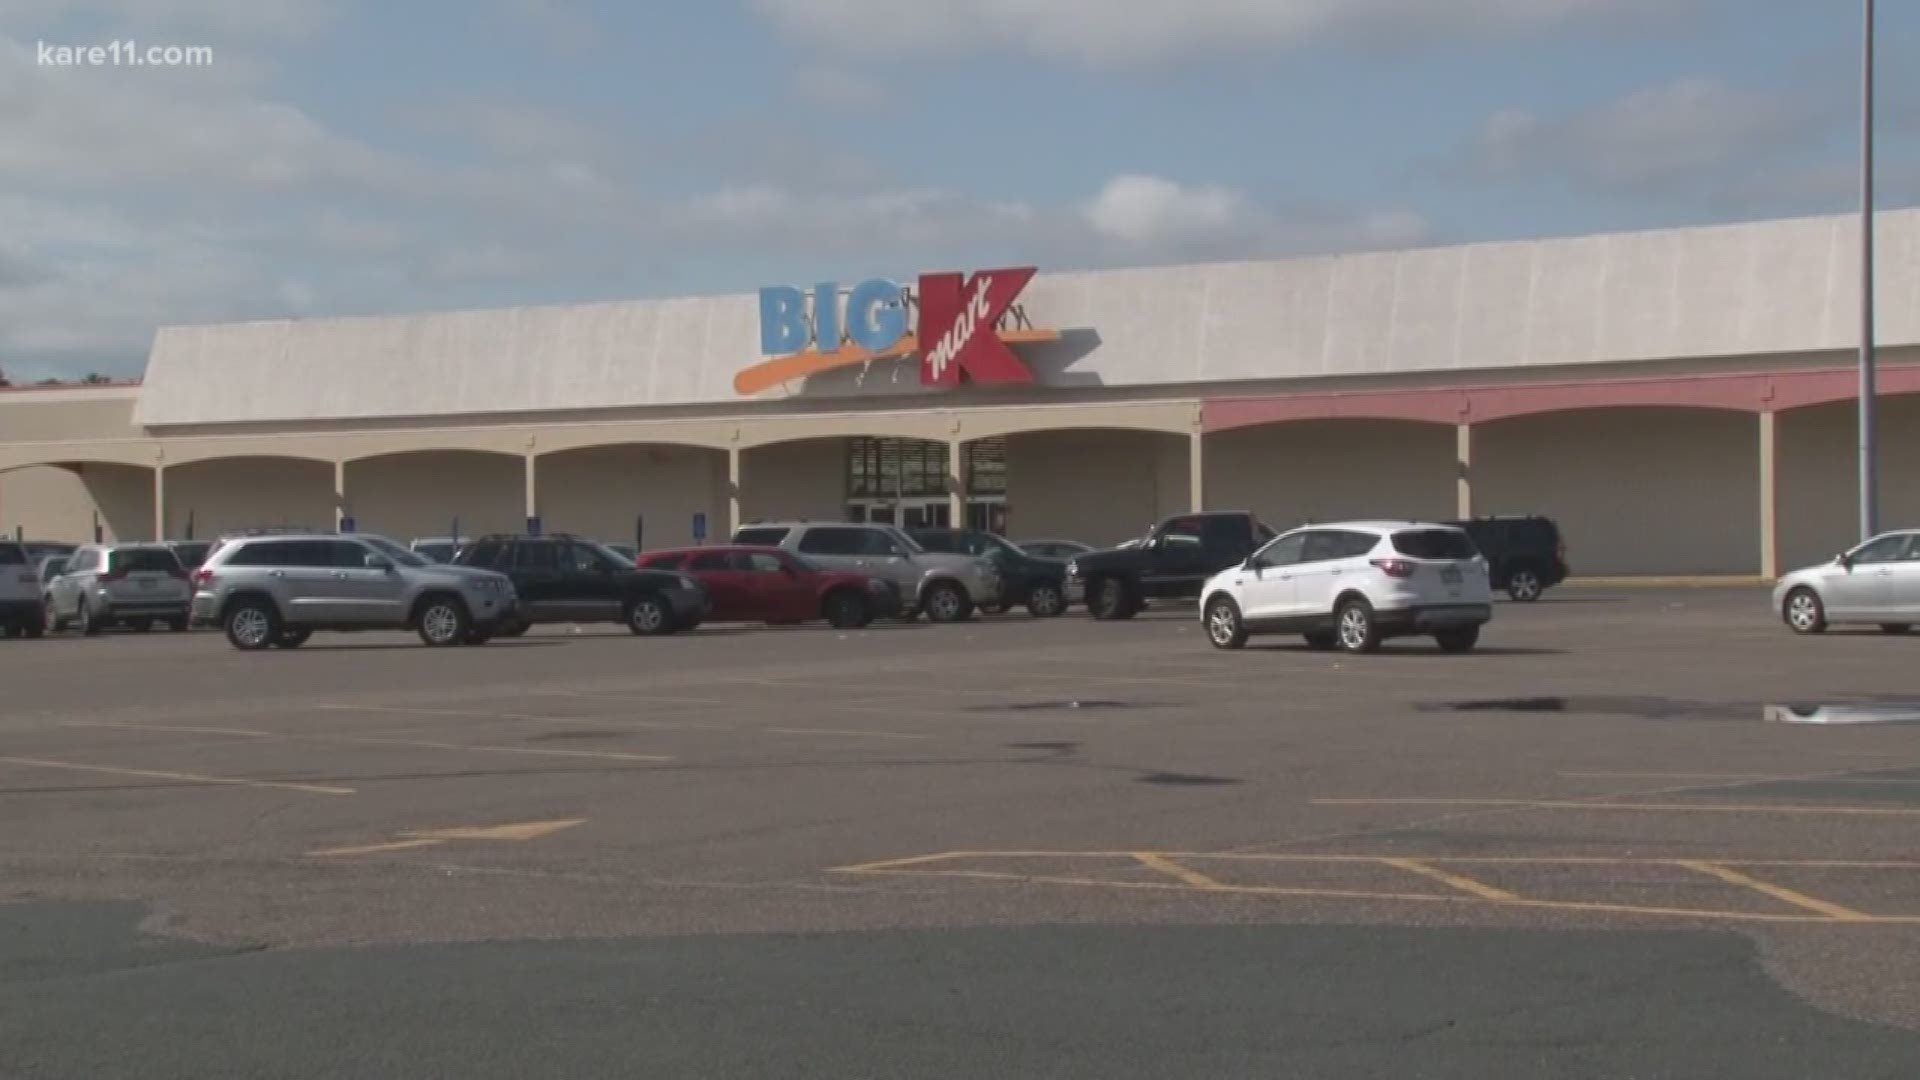 Kmart's announcement follows word that Walmart will soon close its Midway store.